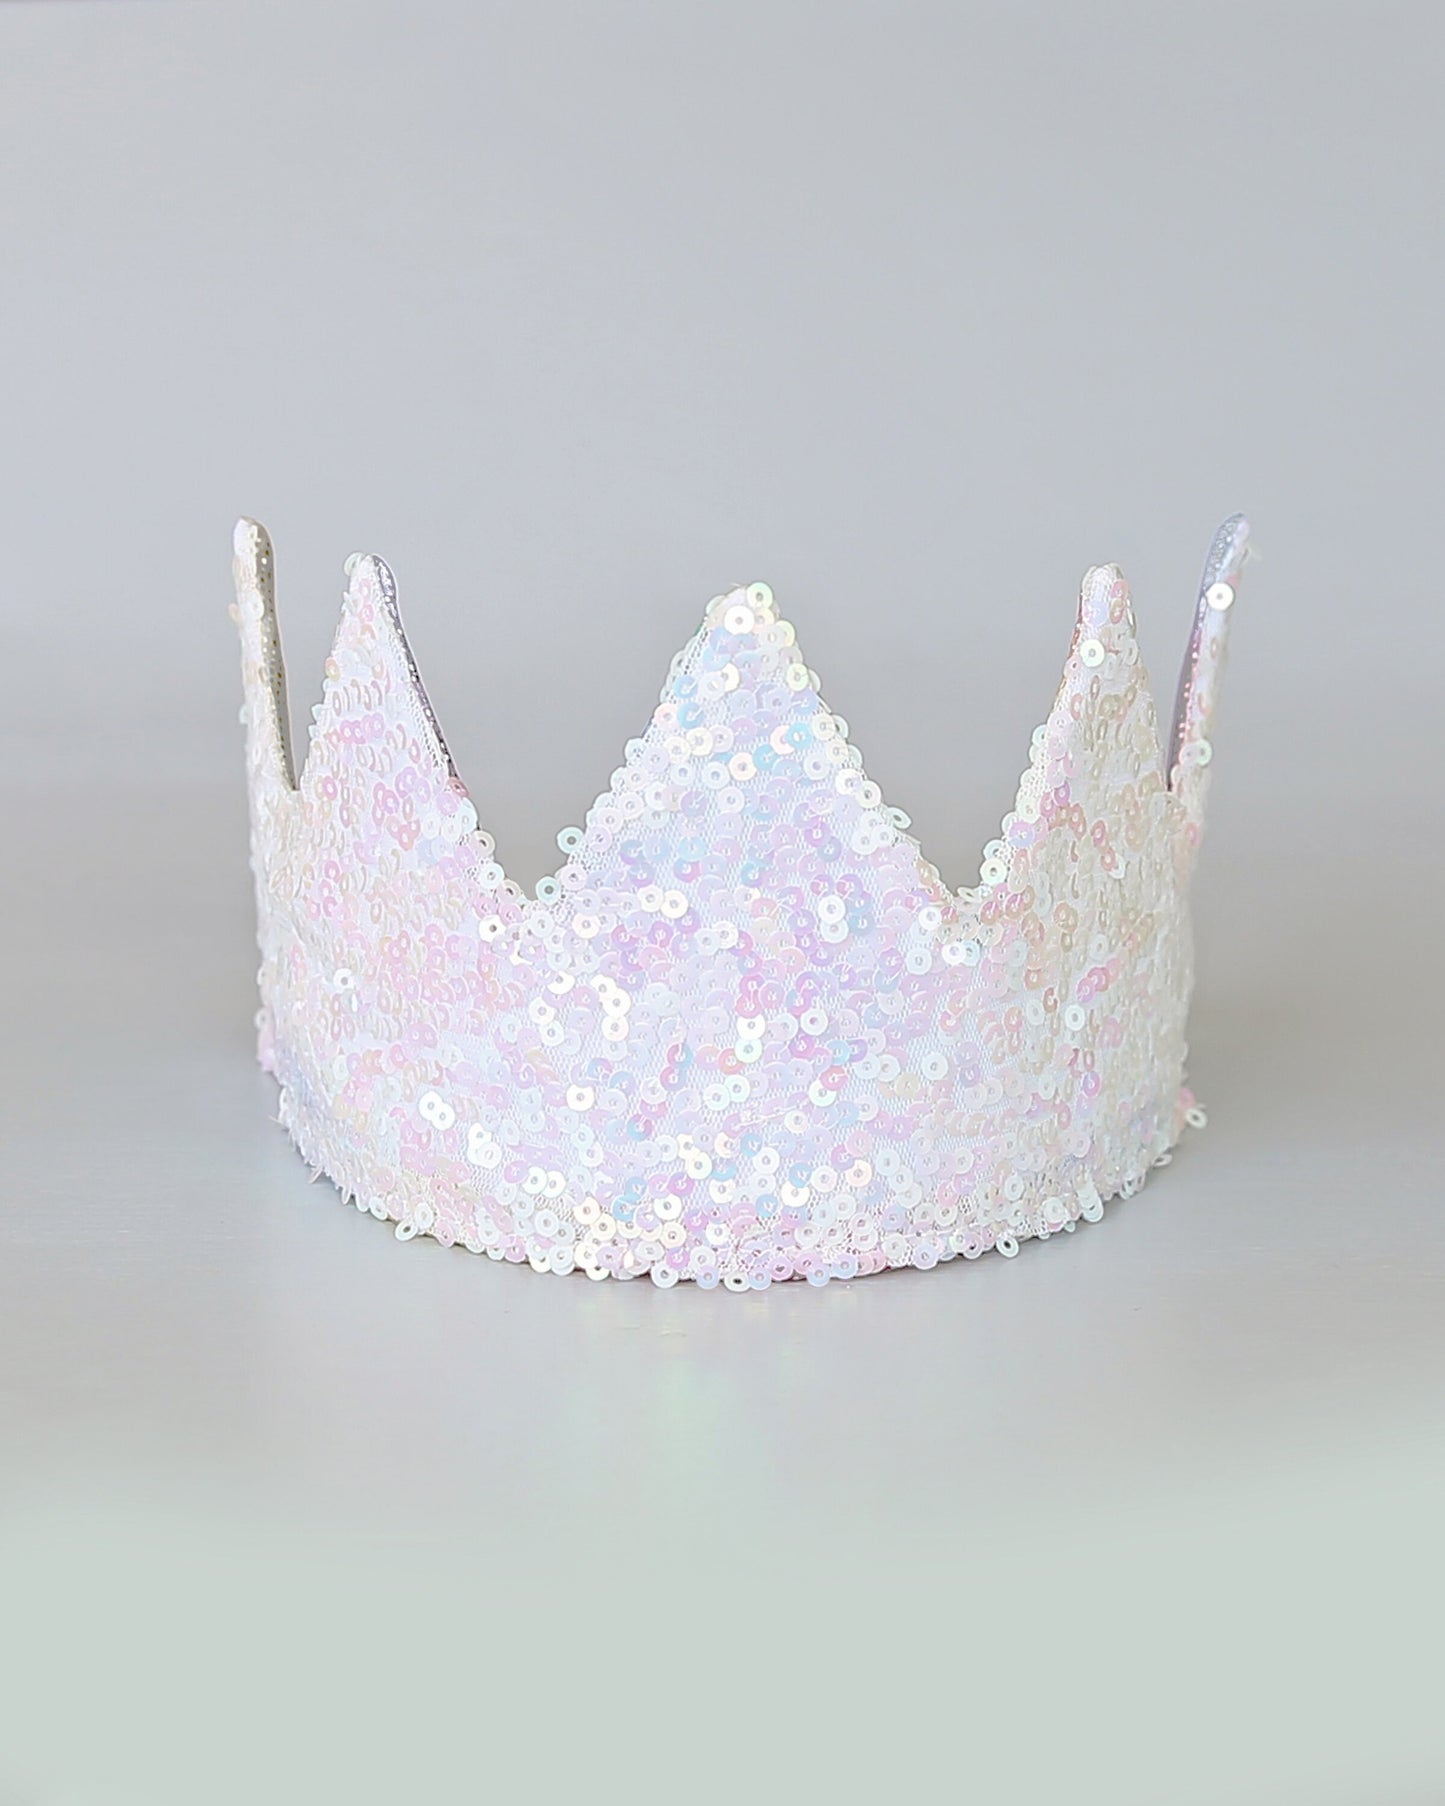 Dress Up Crown - Sequin Crown - Birthday Crown - Roses Sequin Crown REVERSE to White Sequins - Fits all